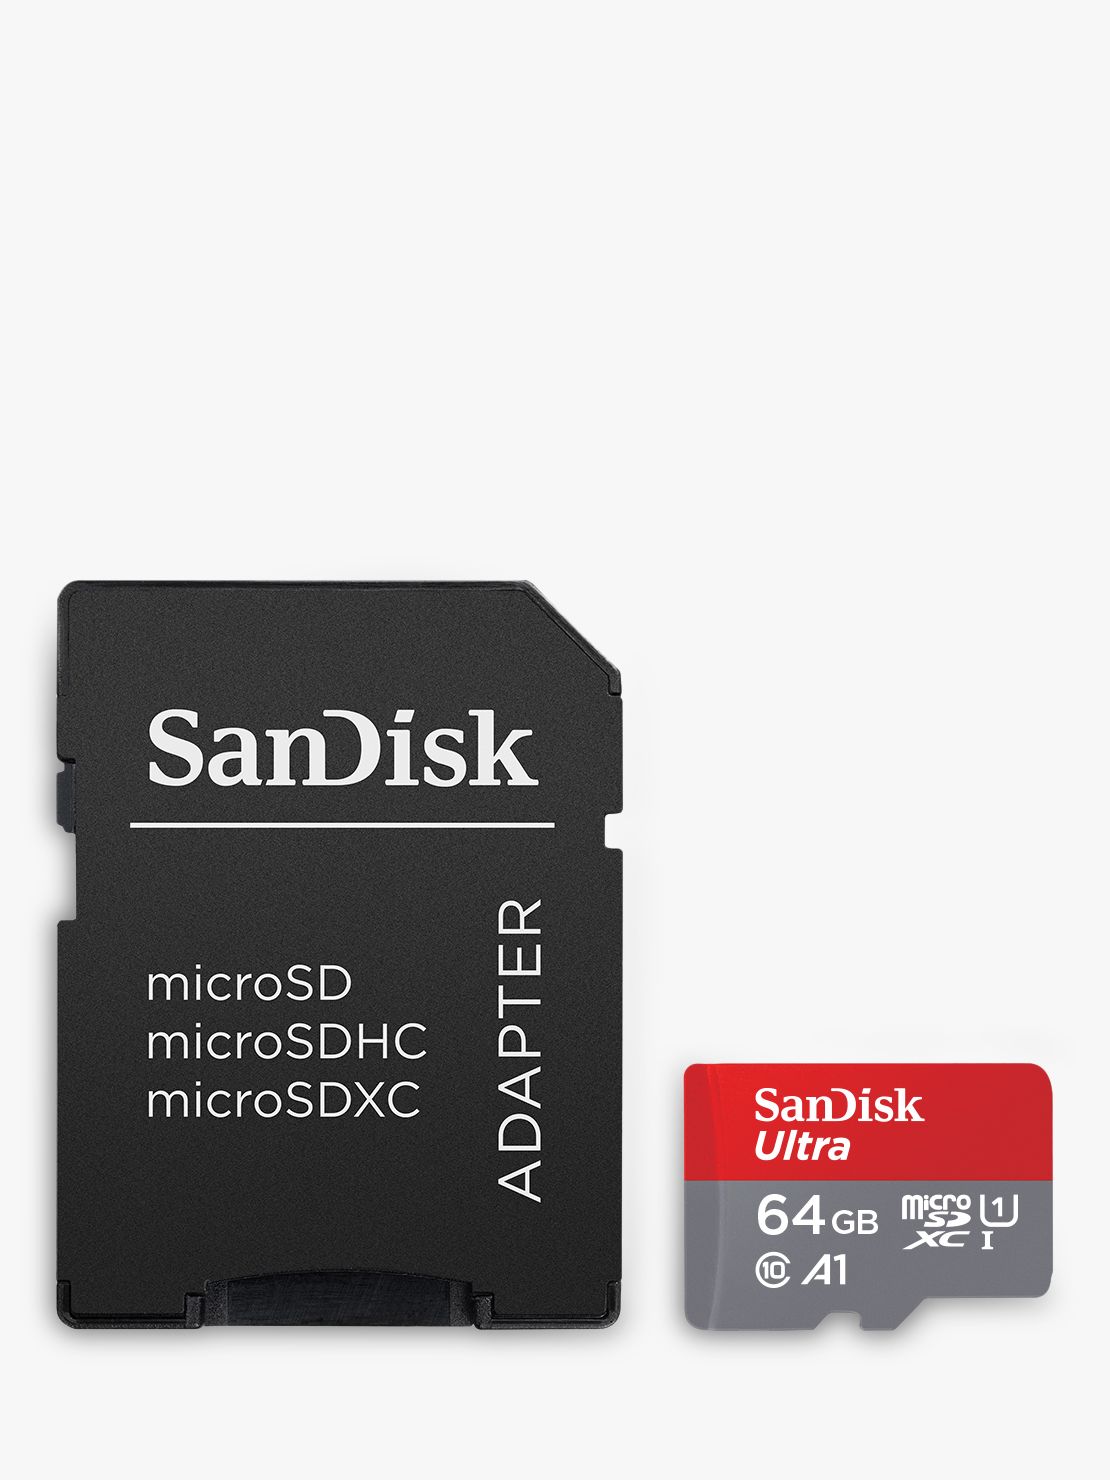 Sandisk Ultra Uhs I Class 10 A1 App Performance Microsd Sdxc Card Up To 100mb S Read Speed 64gb With Sd Adapter At John Lewis Partners